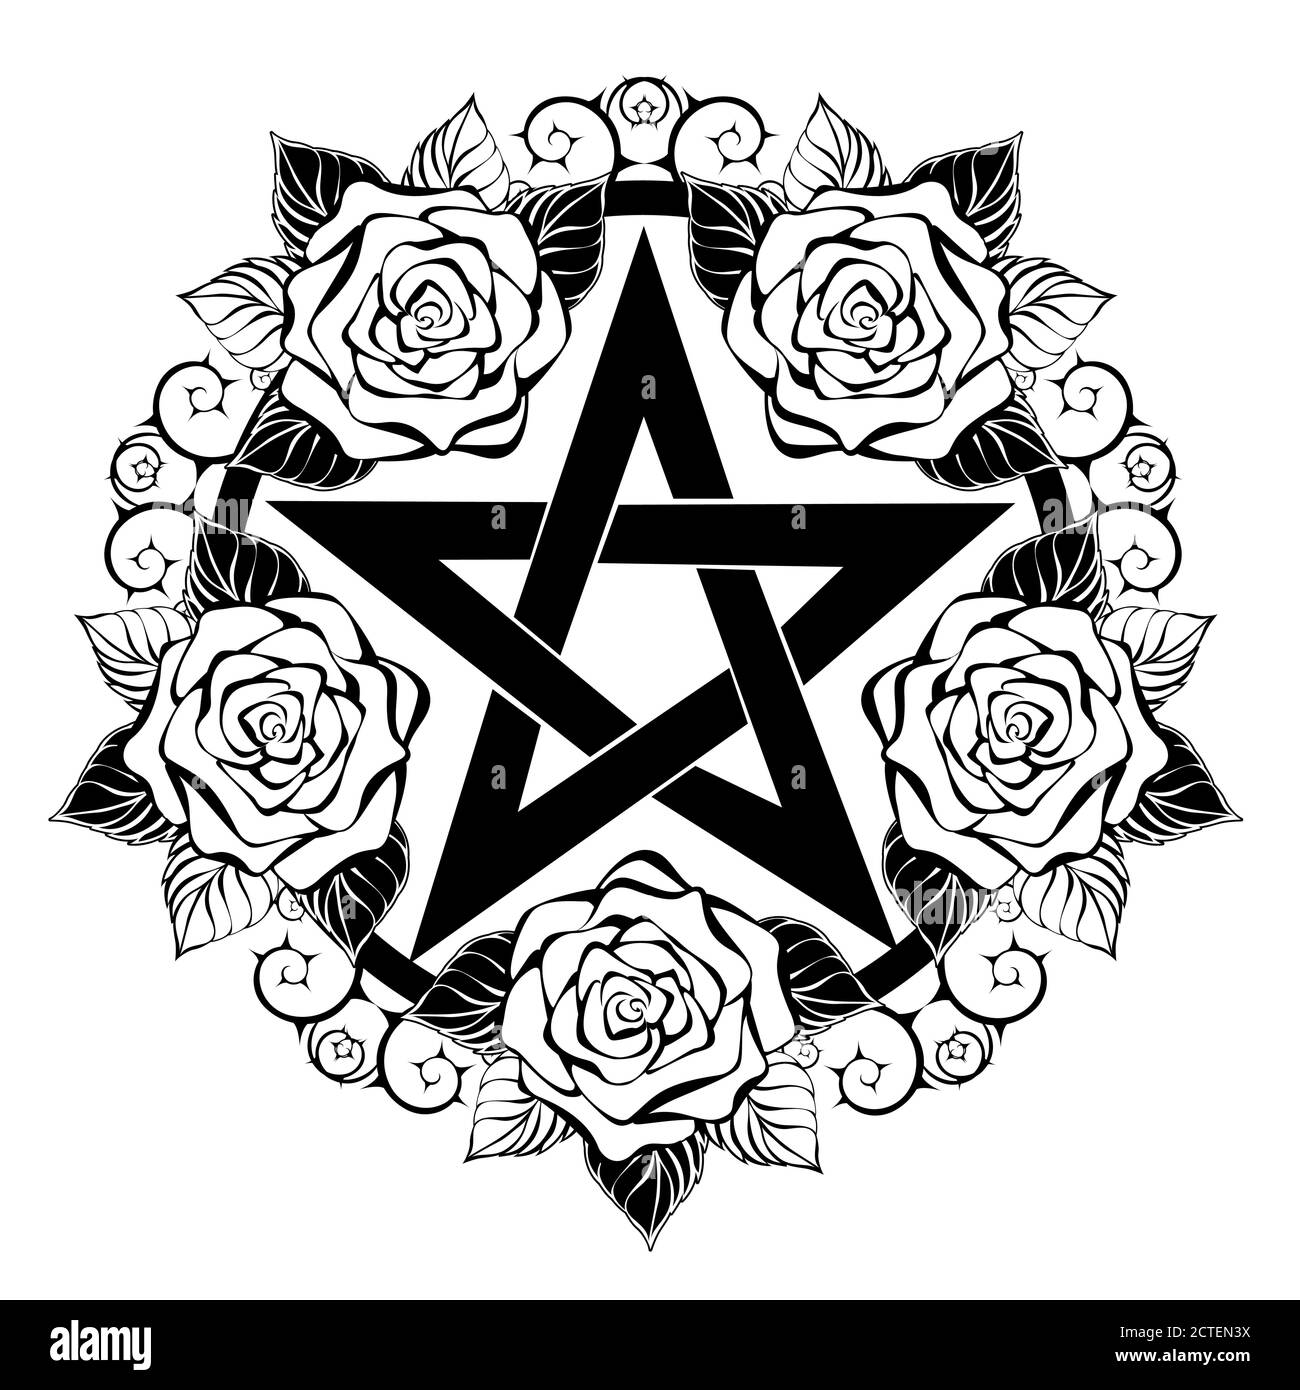 Black pentagram with contour, artistically drawn roses with leaves and thorny stem on white background. Wiccan symbol. Stock Vector